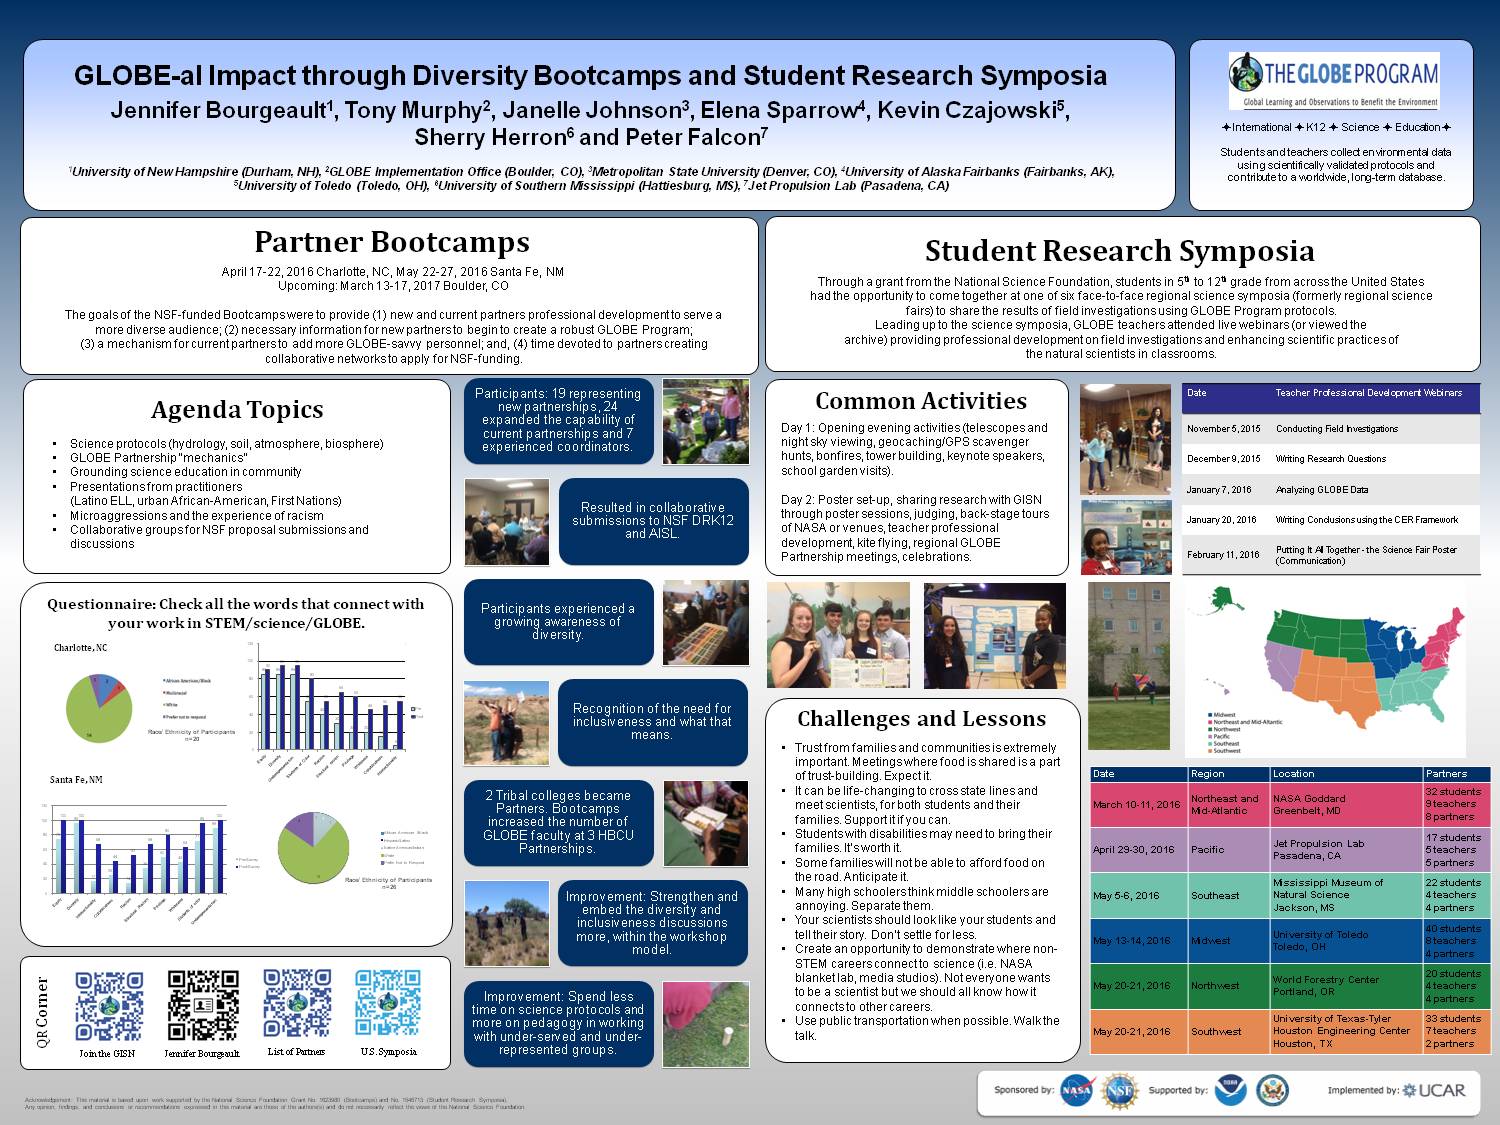 Globe-Al Impact Through Diversity Bootcamps And Student Research Symposia by jlhagen